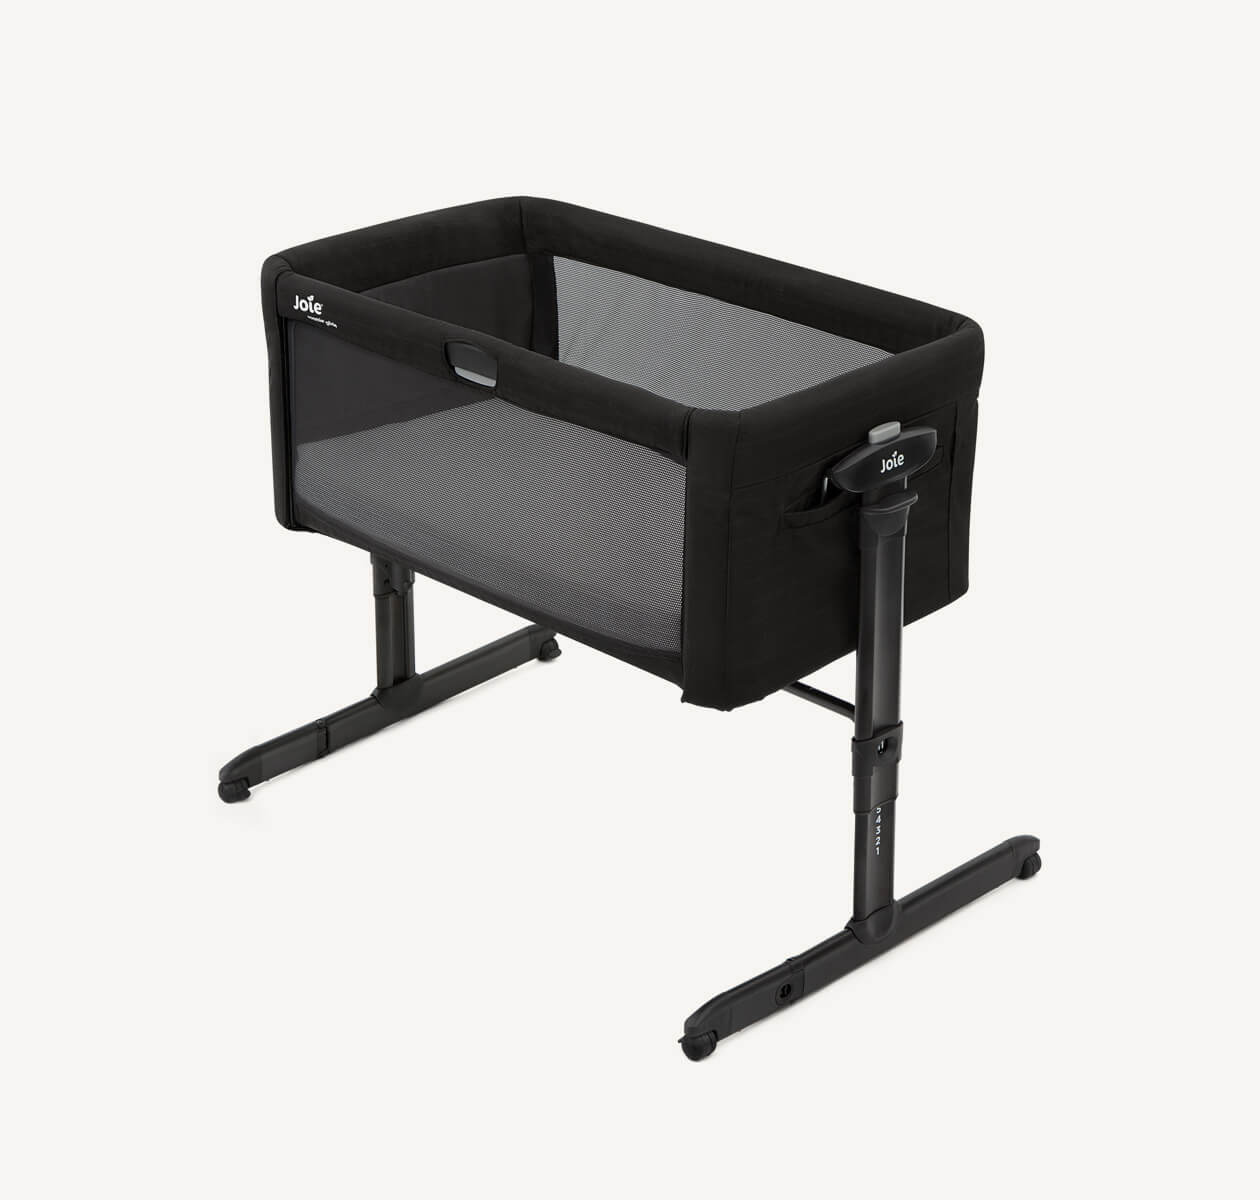 Black Joie roomie glide bedside crib at a right angle.